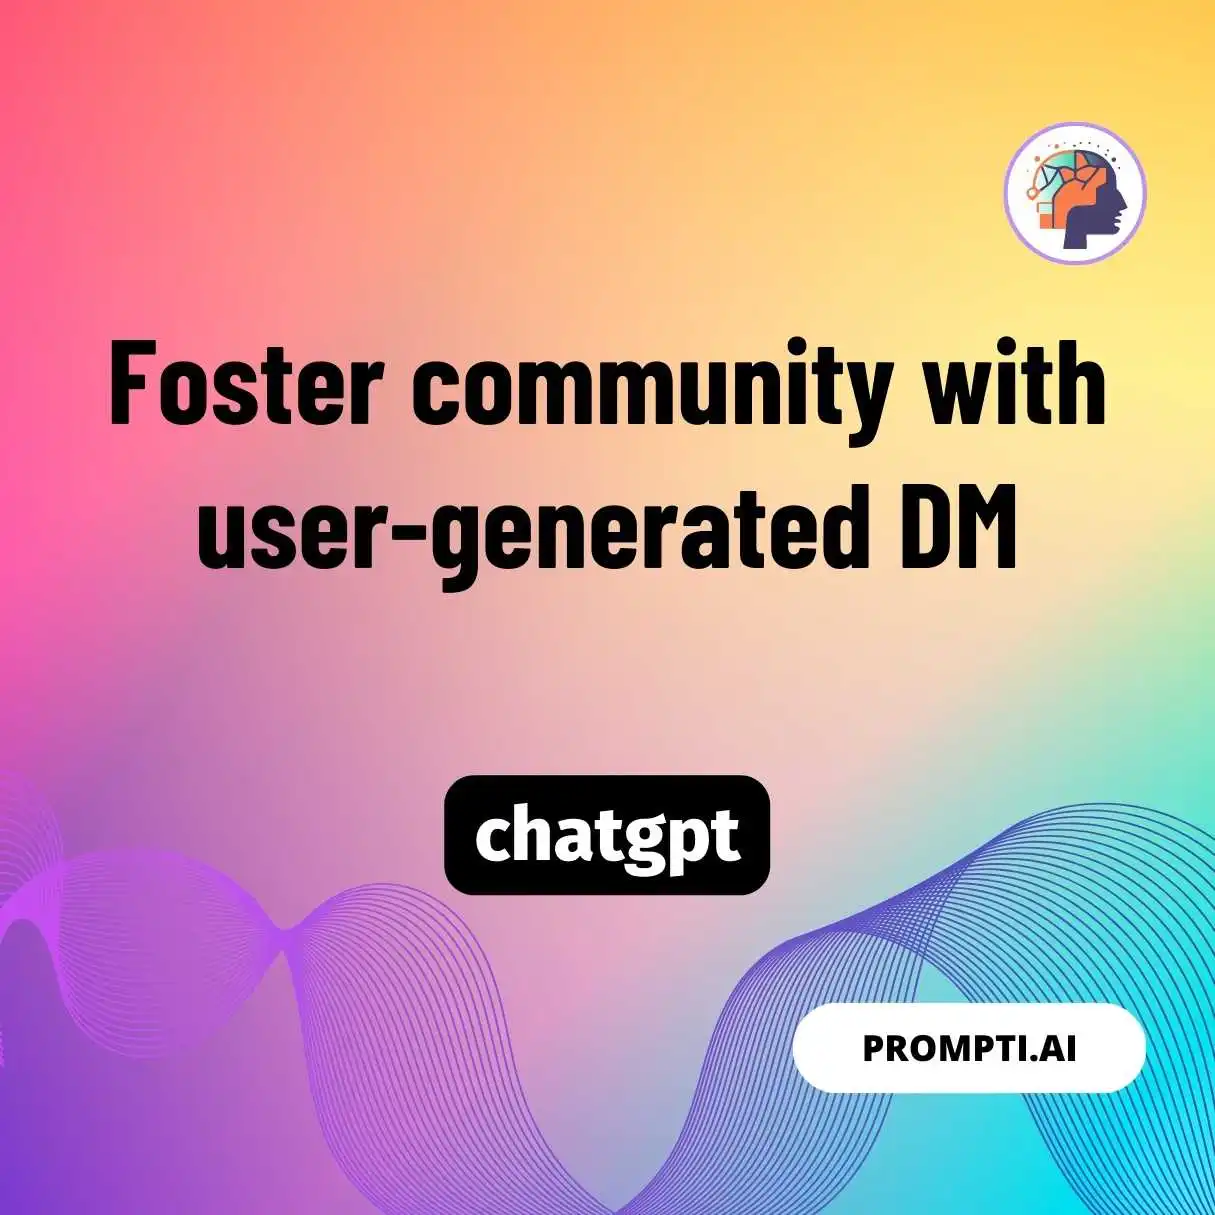 Foster community with user-generated DM